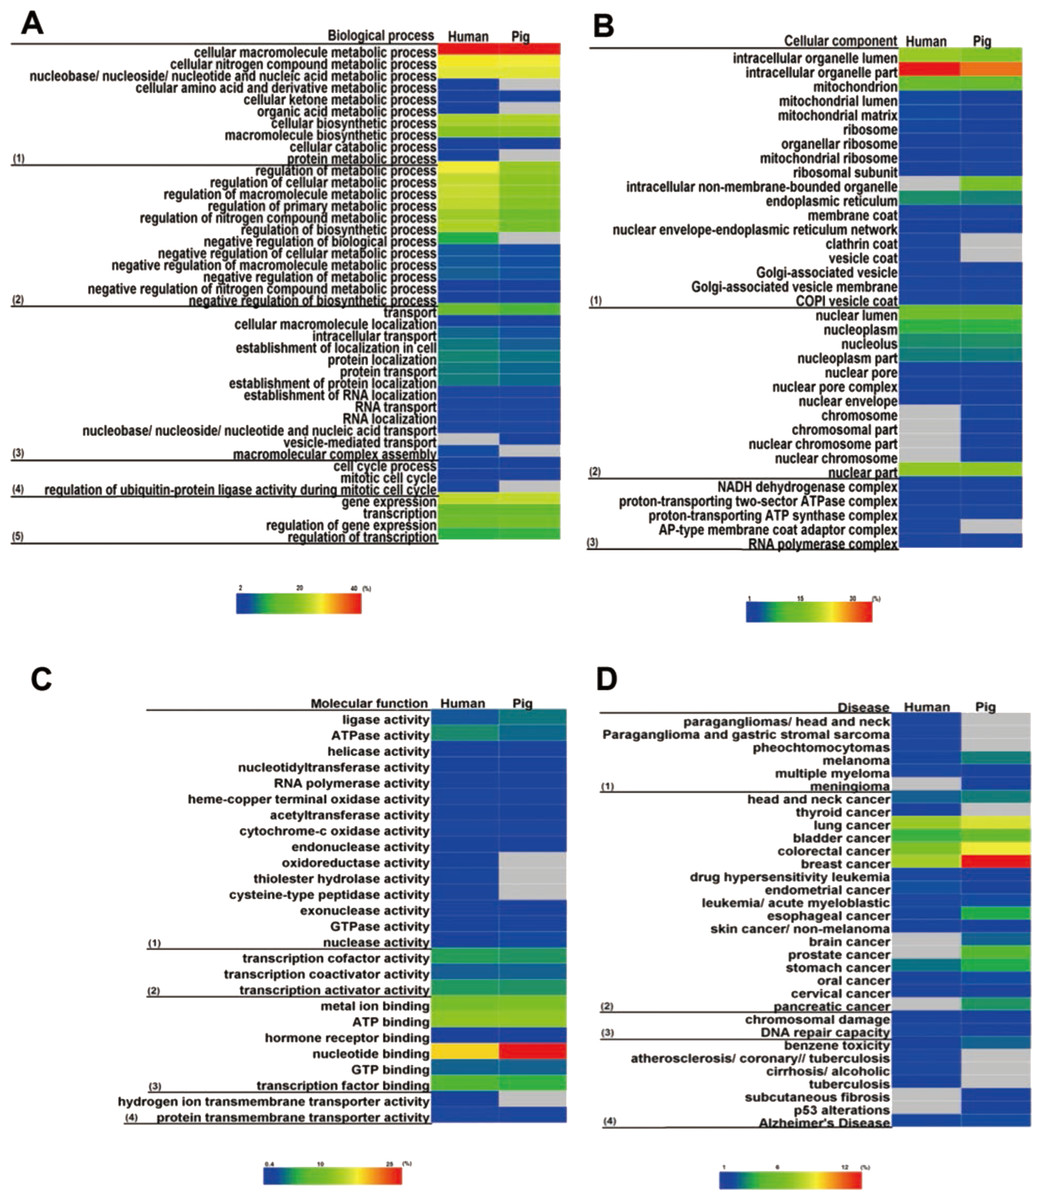 Divergent and convergent evolution of housekeeping genes in human–pig